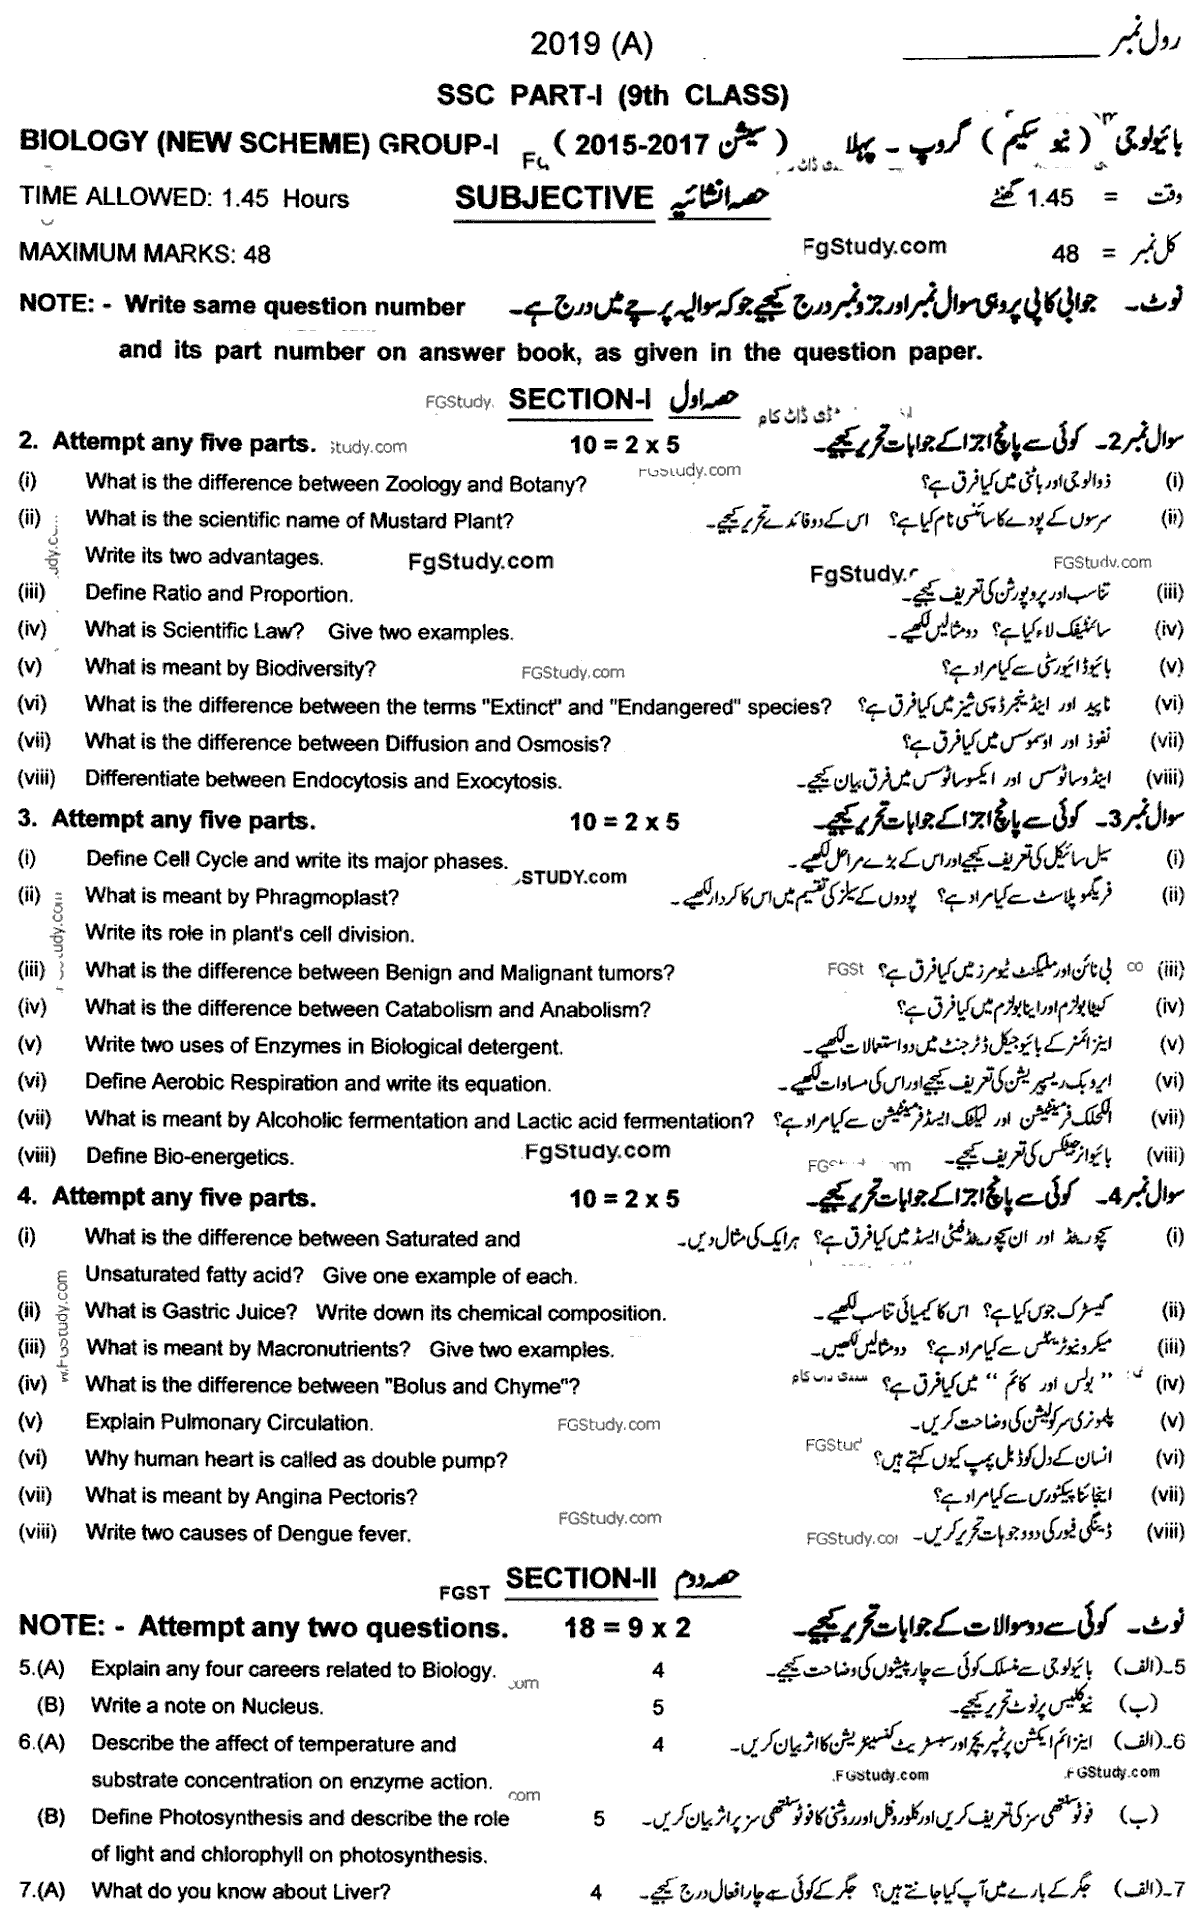 9th Class Biology Past Paper 2019 Group 1 Subjective Multan Board